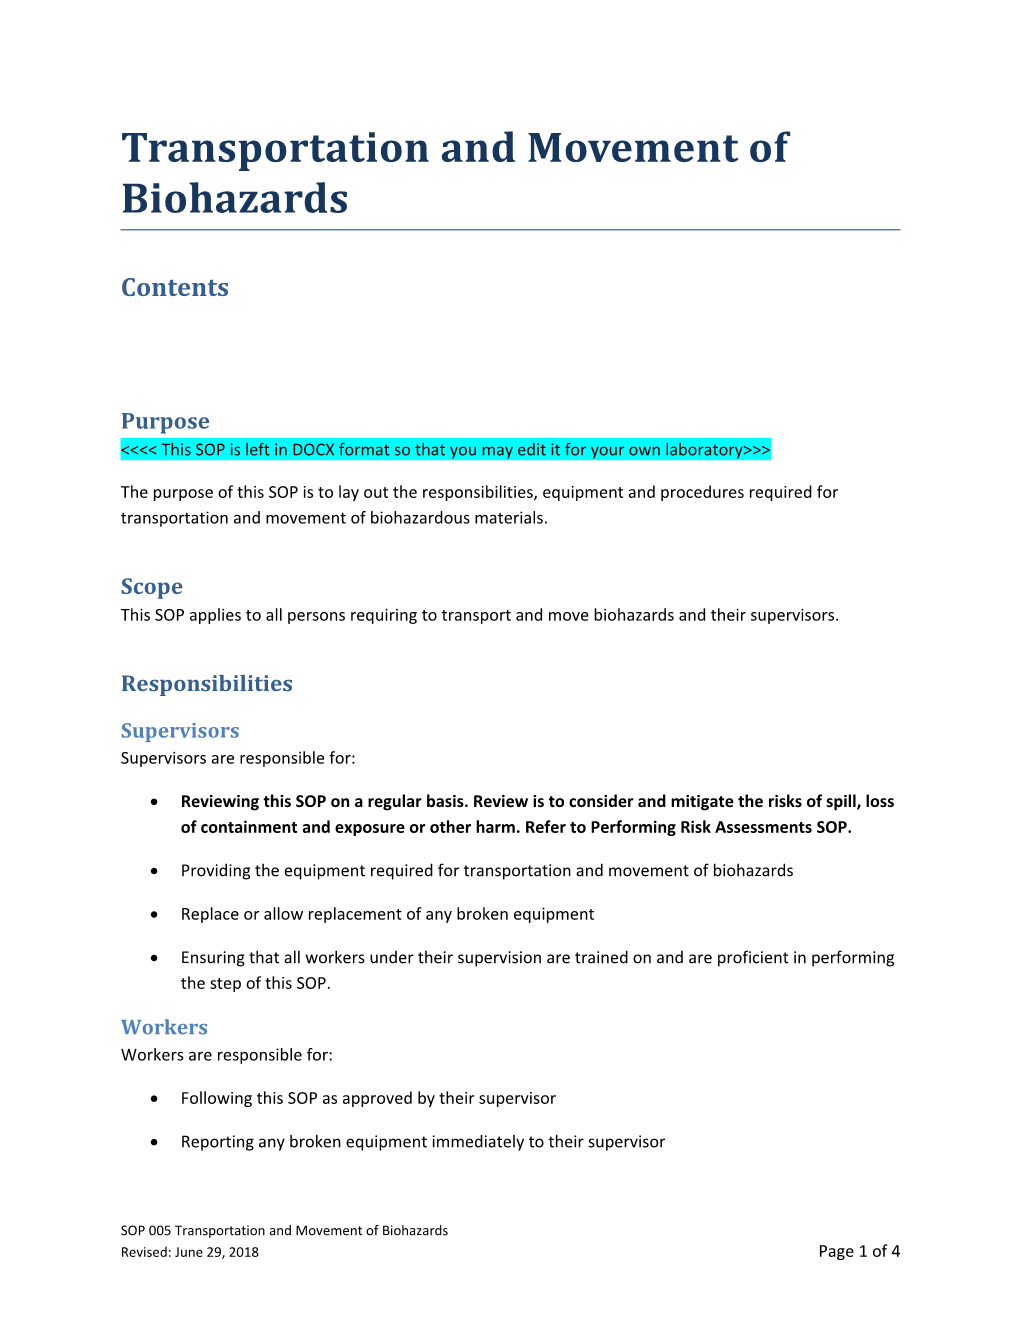 Transportation and Movement of Biohazards